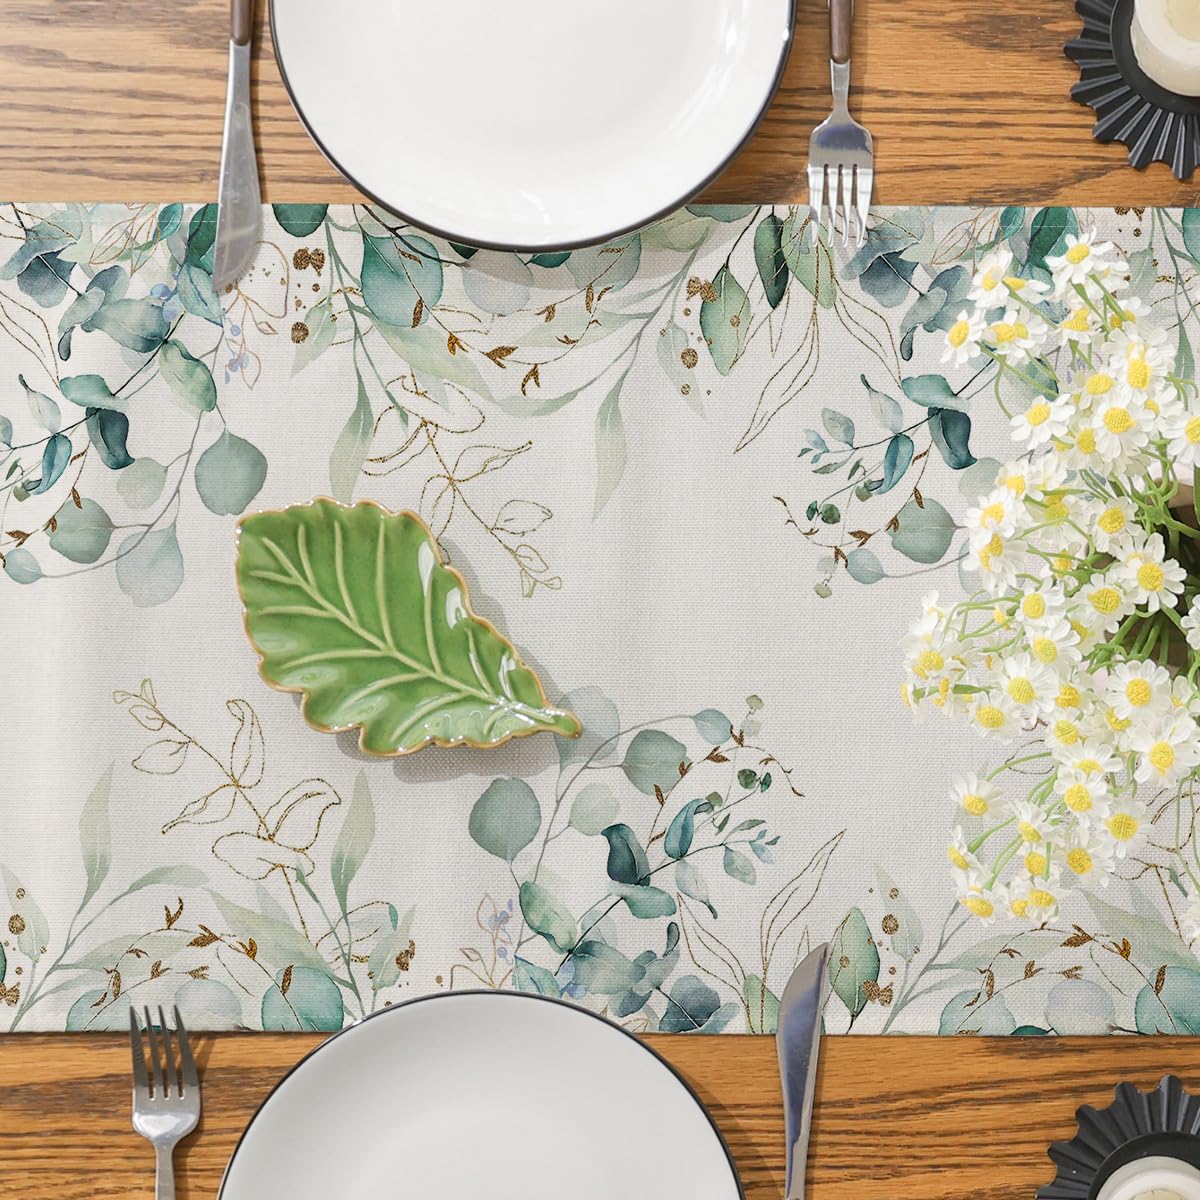 Siilues Spring Table Runner, Spring Decorations Off White Eucalyptus Leaves Green Table Runner Seasonal Spring Summer Burlap Table Runner Holiday Decor for Dining Table Decoration (13" x 90")